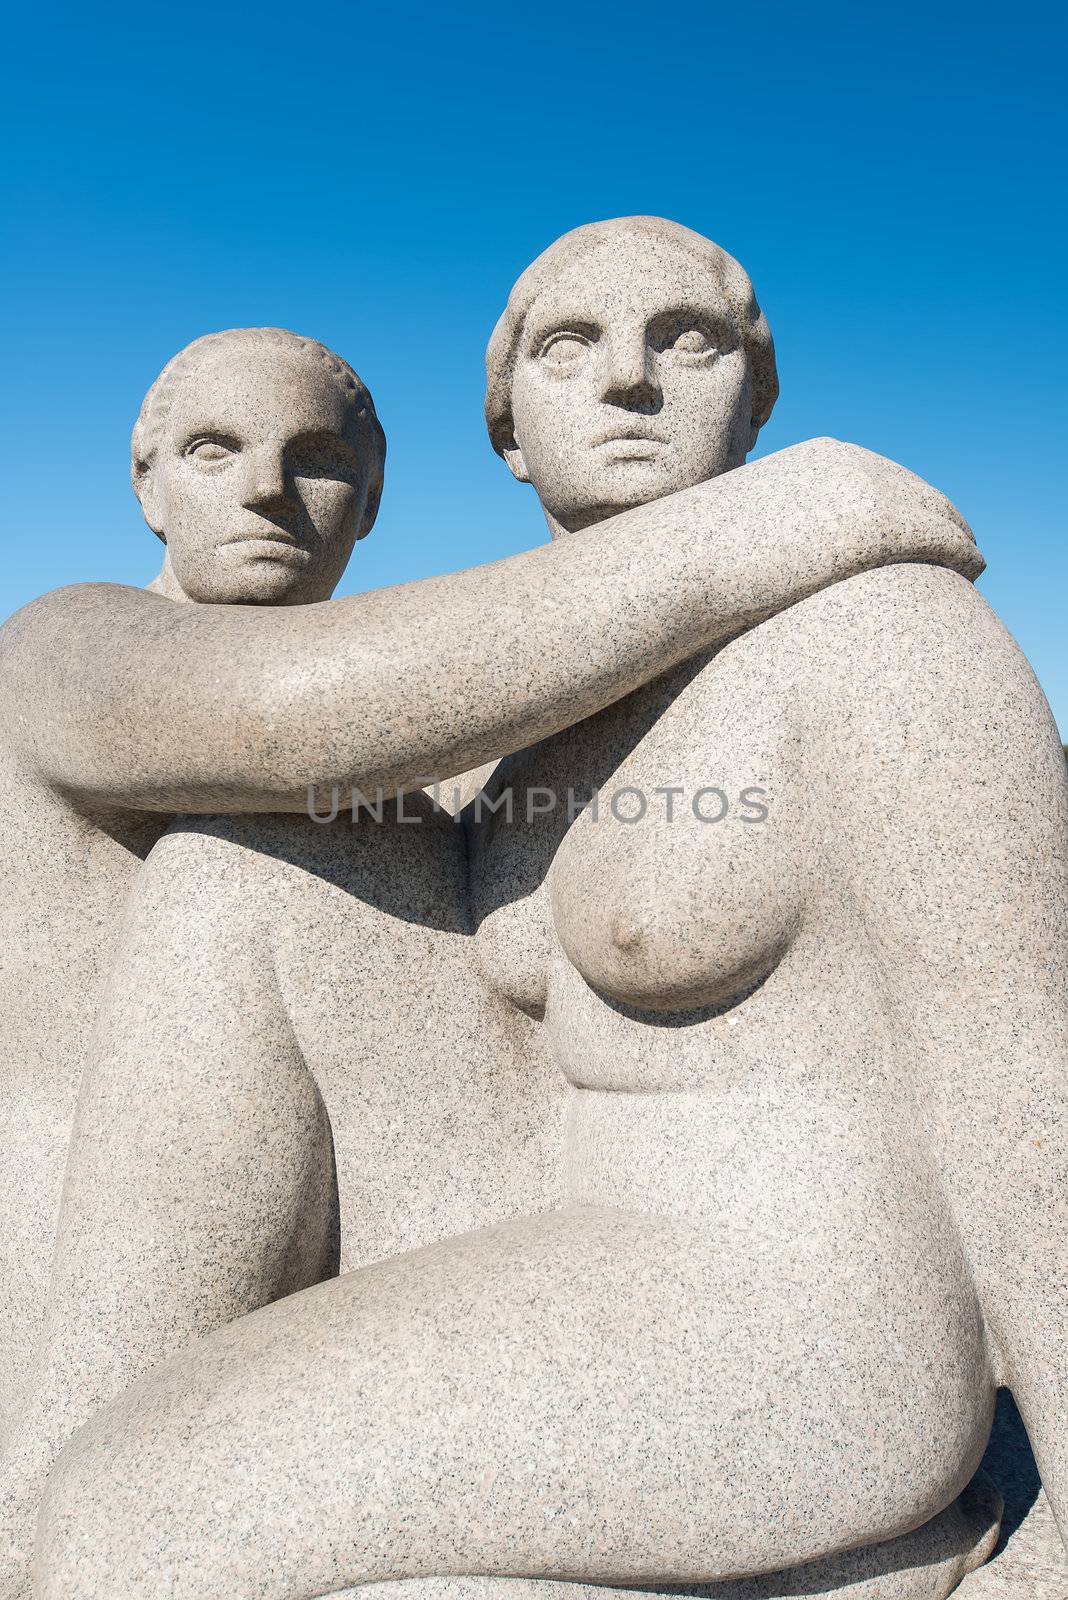 OSLO, NORWAY - AUGUST 27: Vigeland Sculpture Park covers 80 acres (320,000 m2) and features 212 bronze and granite sculptures all designed by Gustav Vigeland. August 27, 2012